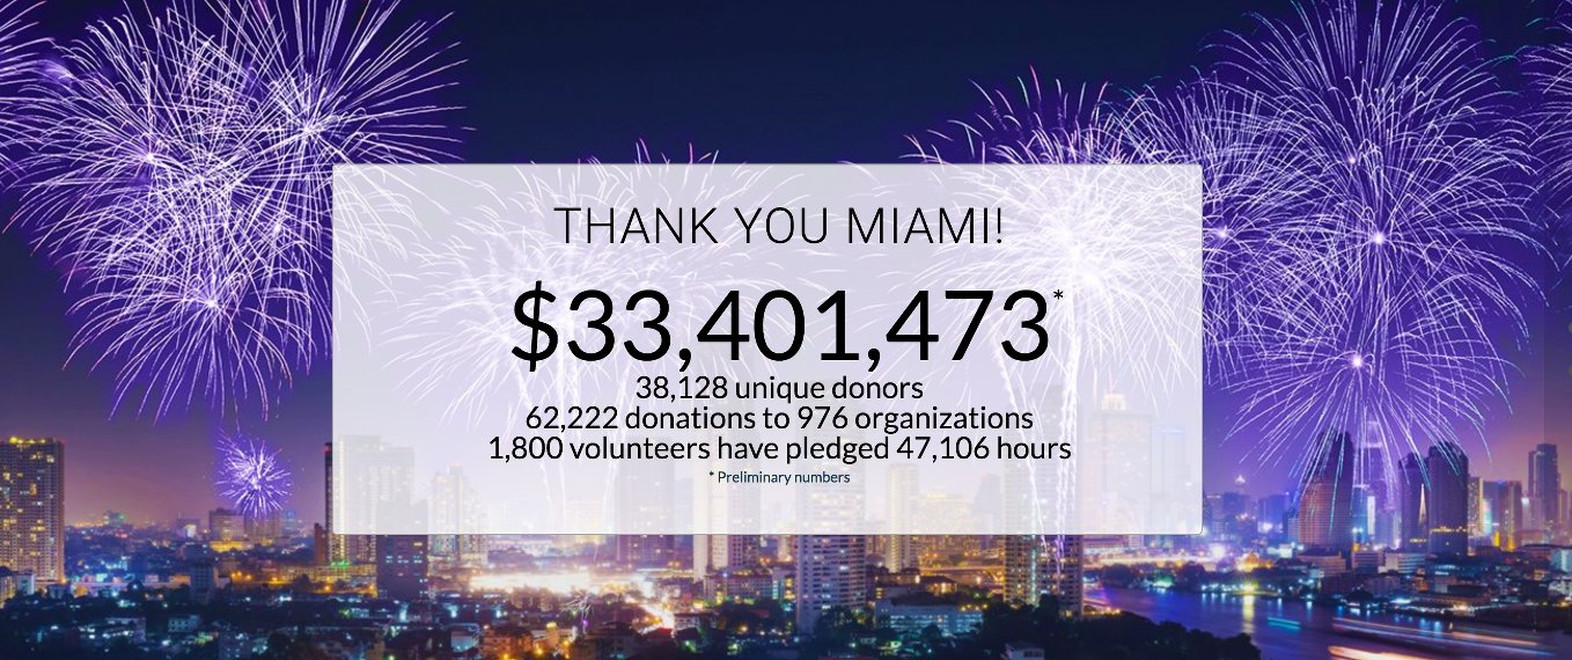 Unofficial Give Miami Day total